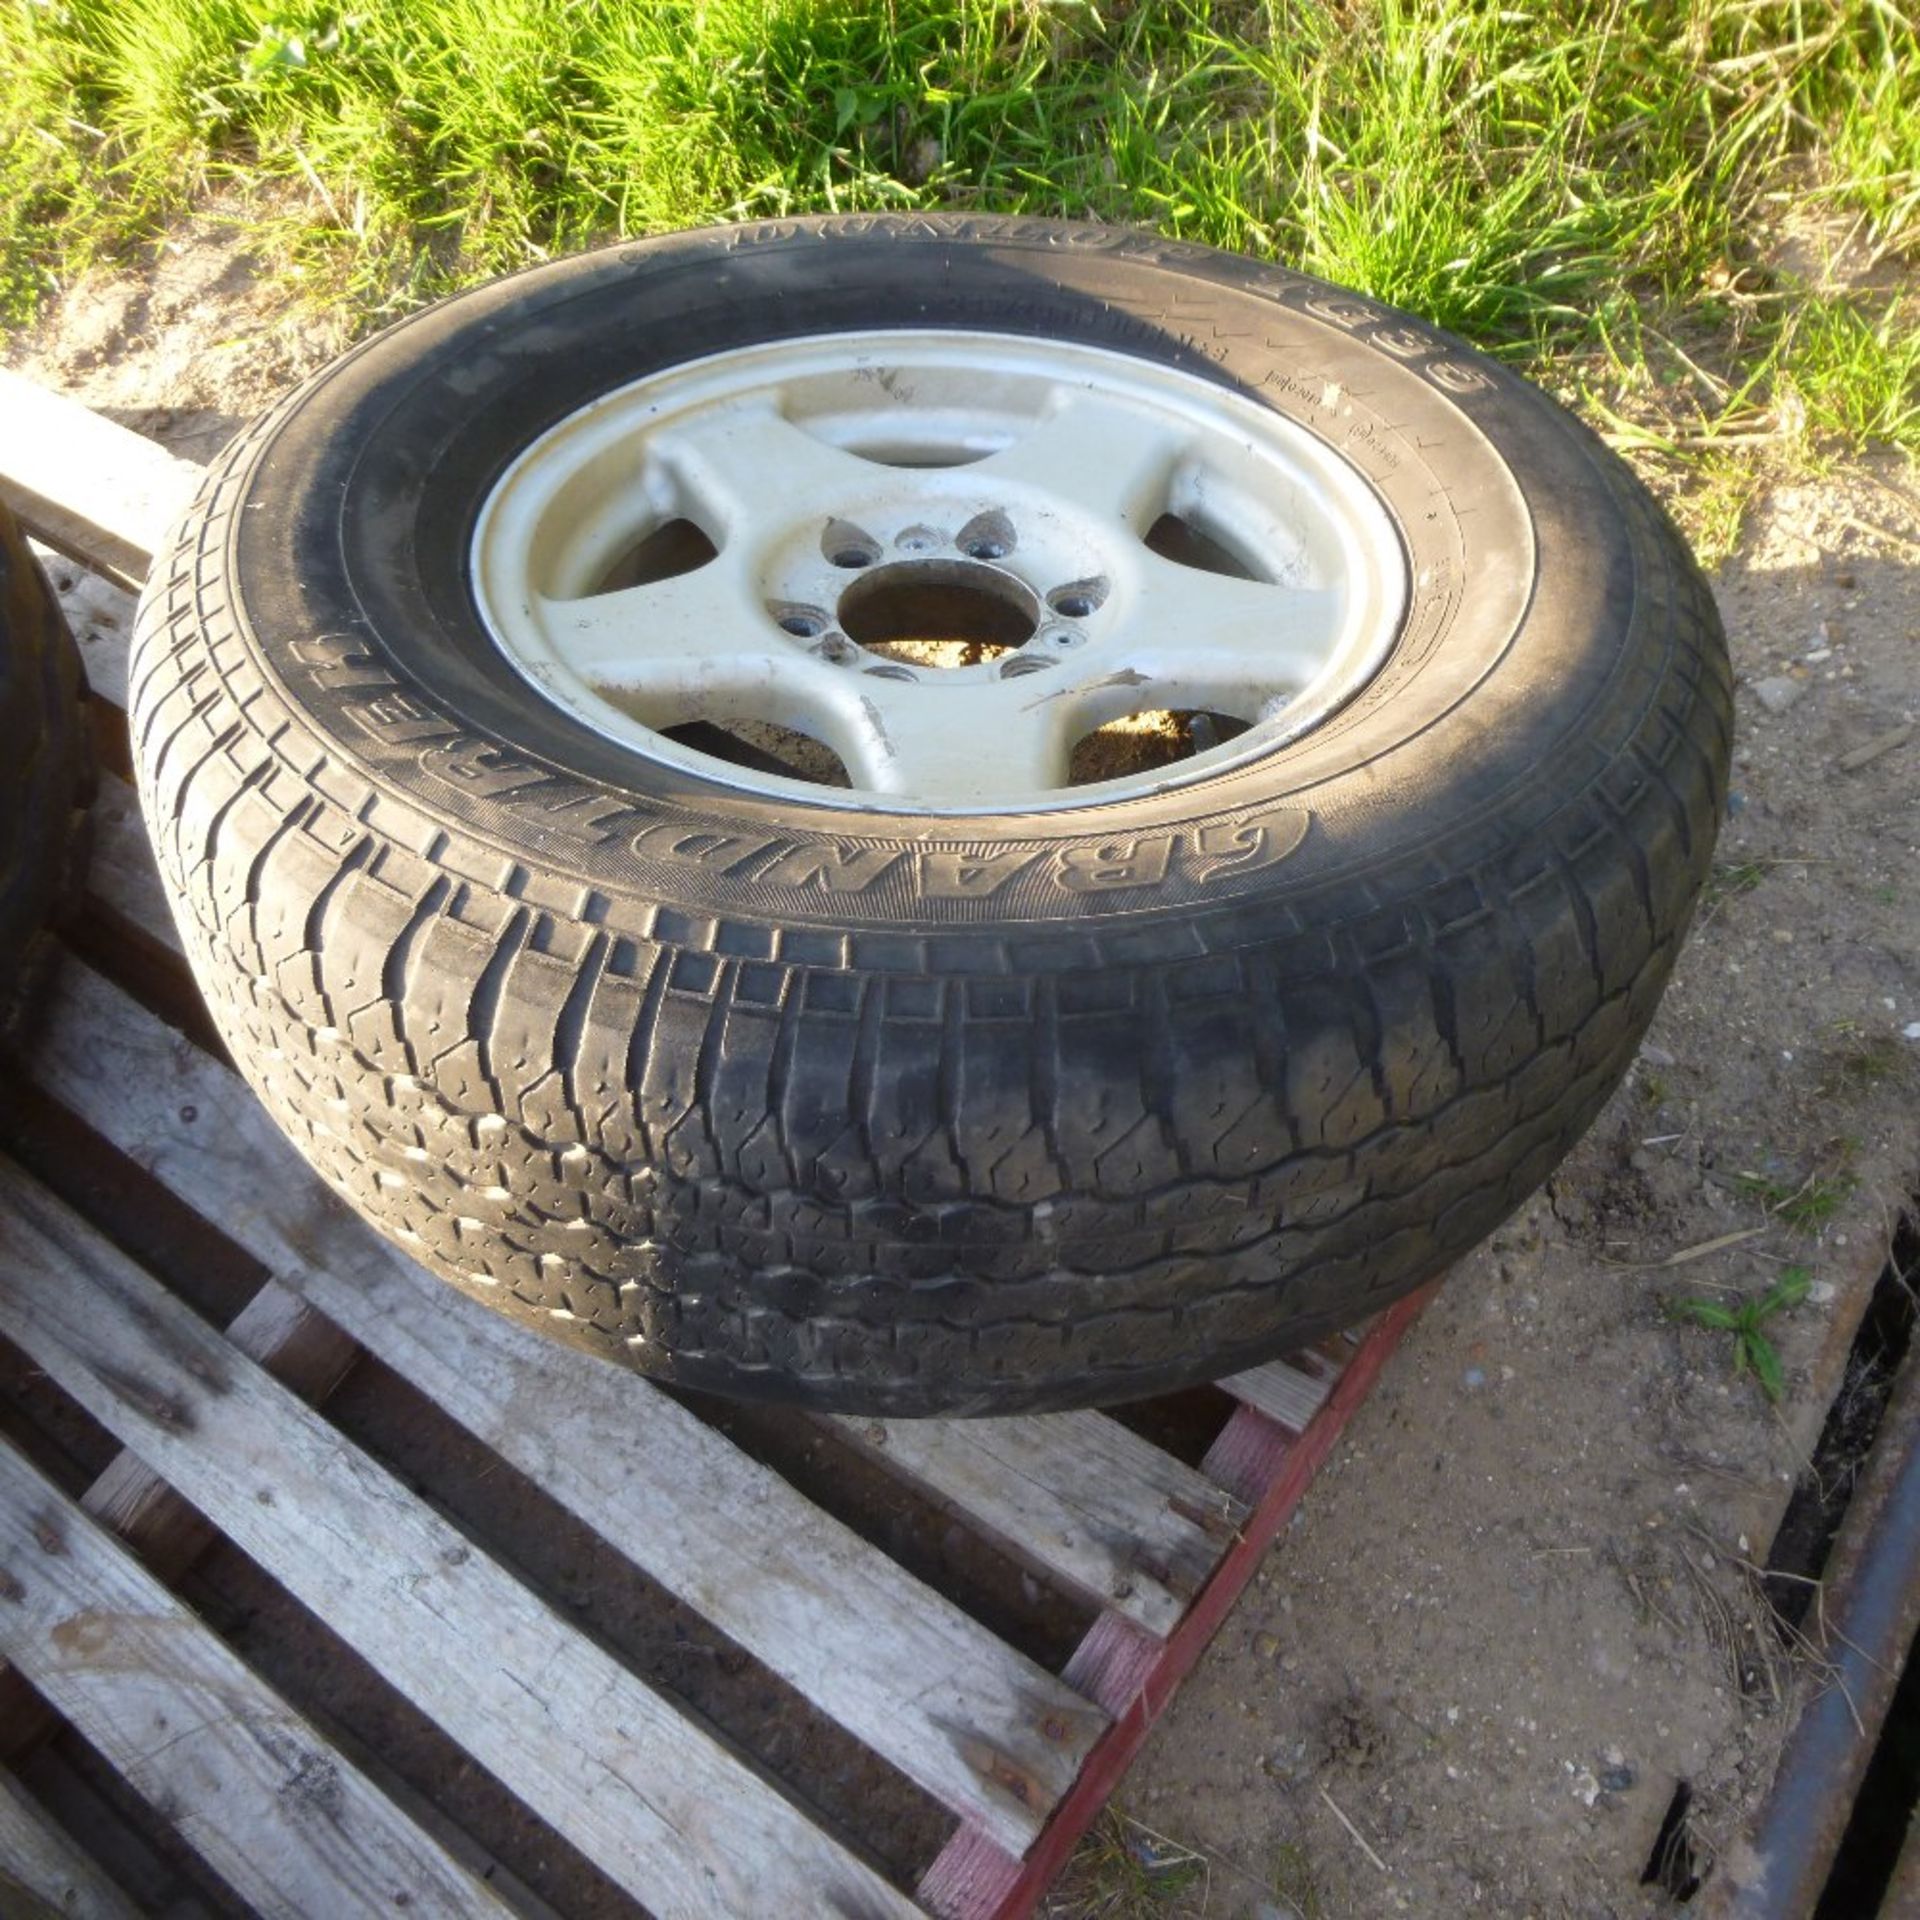 265/70 R 16 Alloy Wheel and part worn tyre from a 4x4